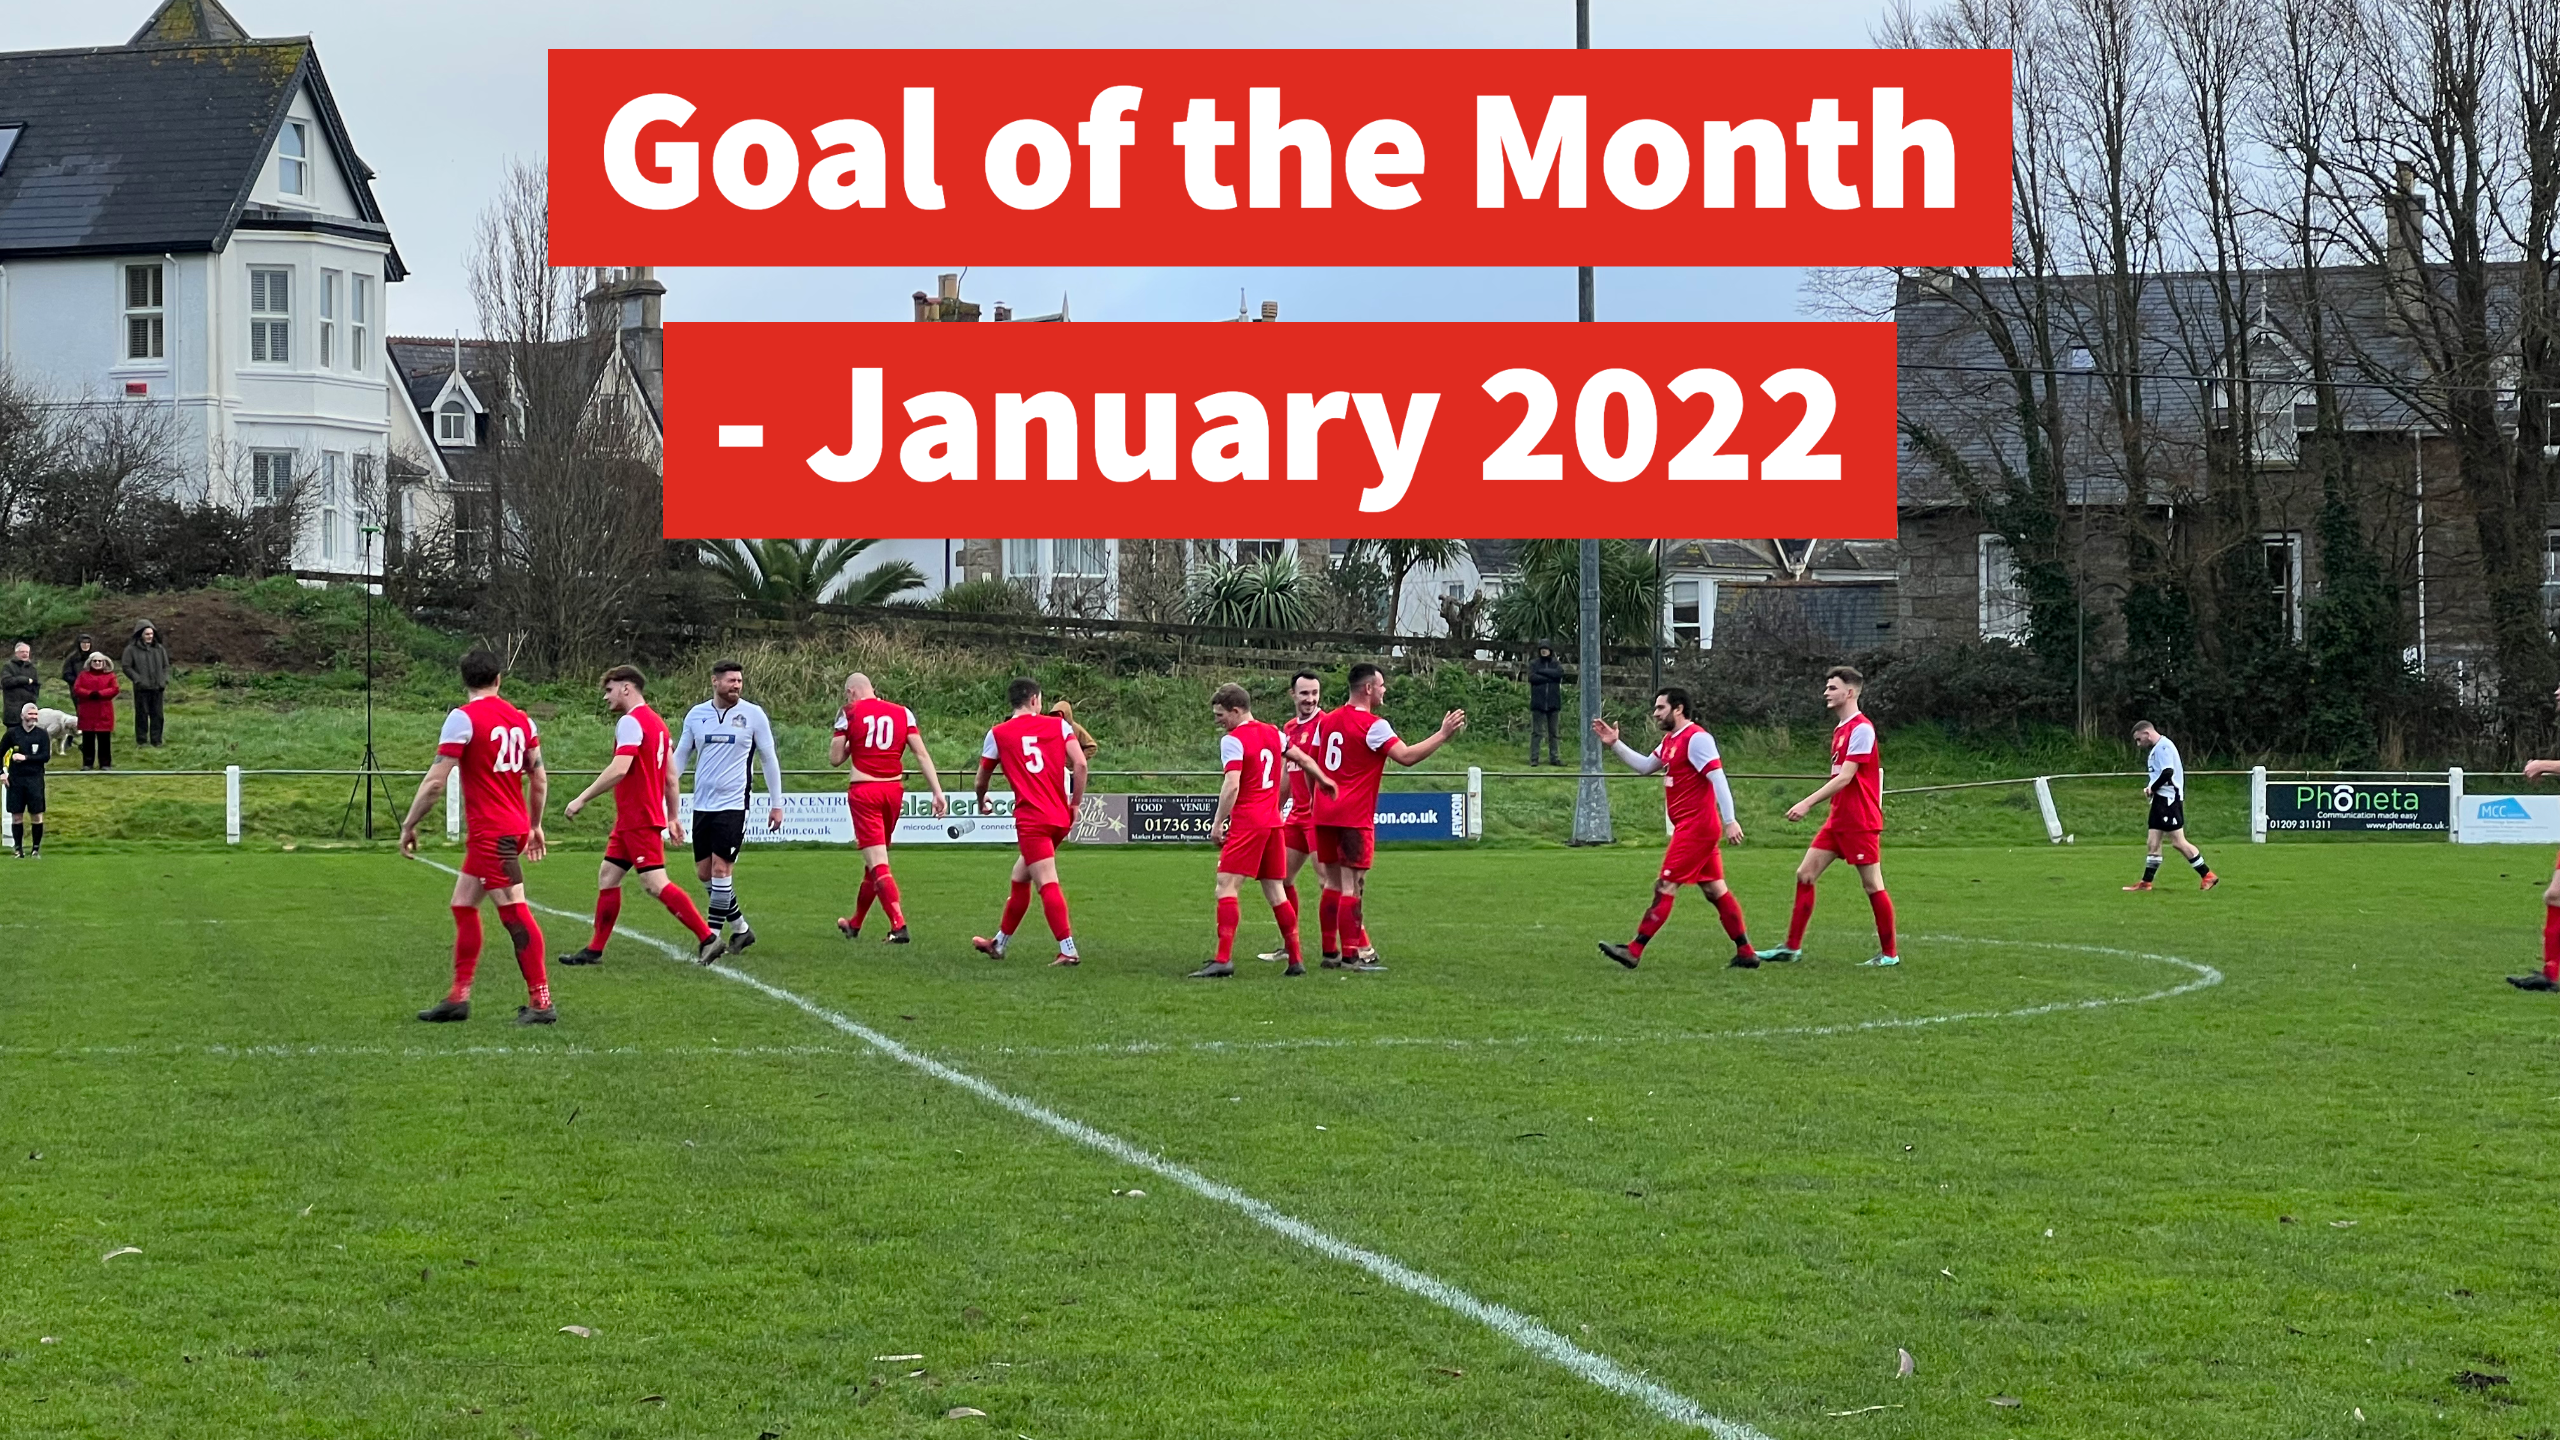 Goal of the Month - January 2022